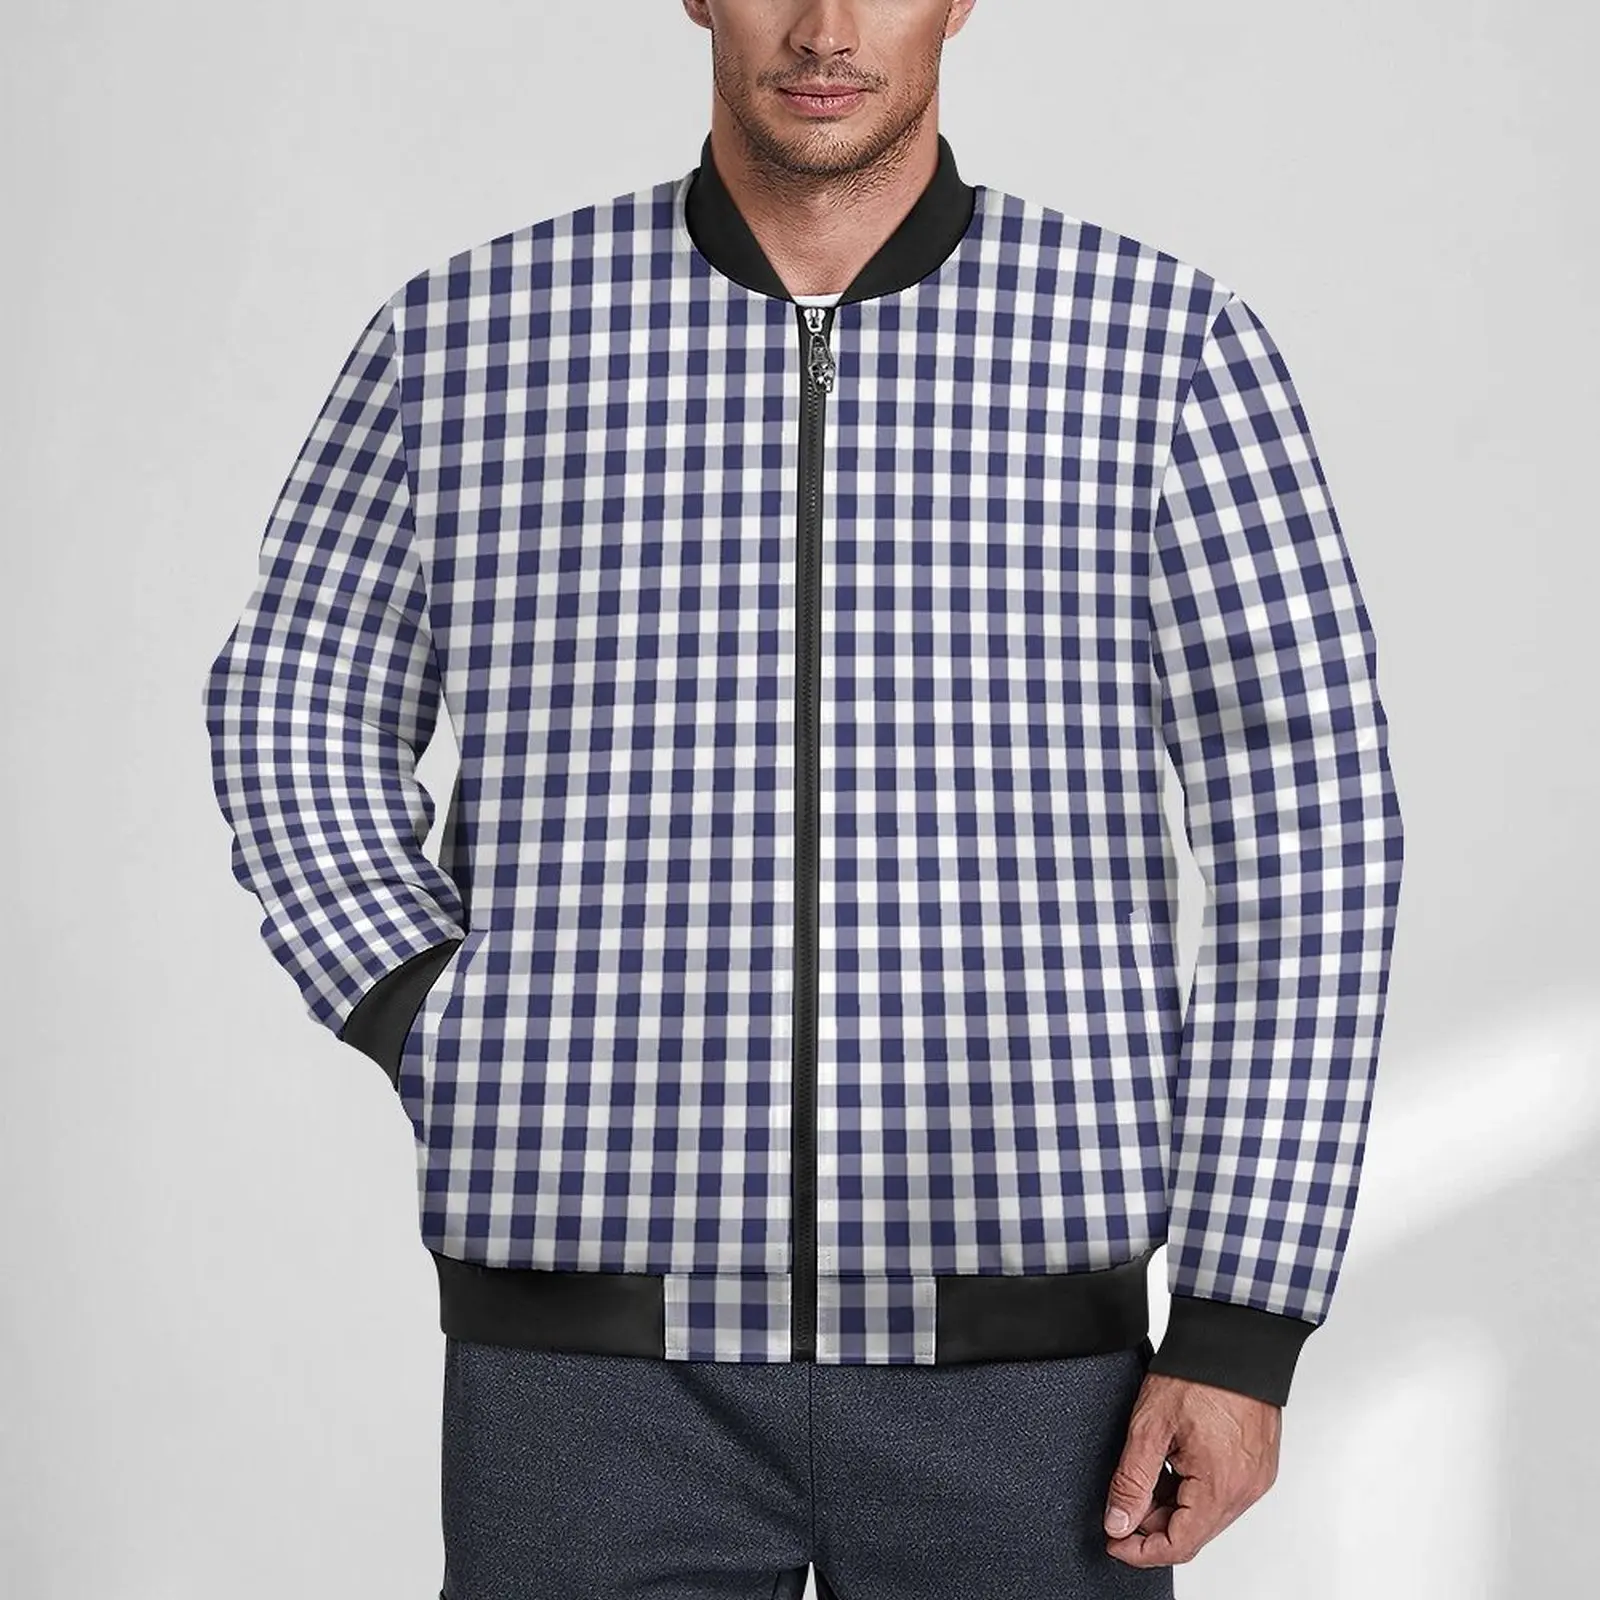 

Blue And White Gingham Jackets Male Checked Winter Coats Trendy Hooded Casual Windbreak Design Outdoor Jacket Plus Size 6XL